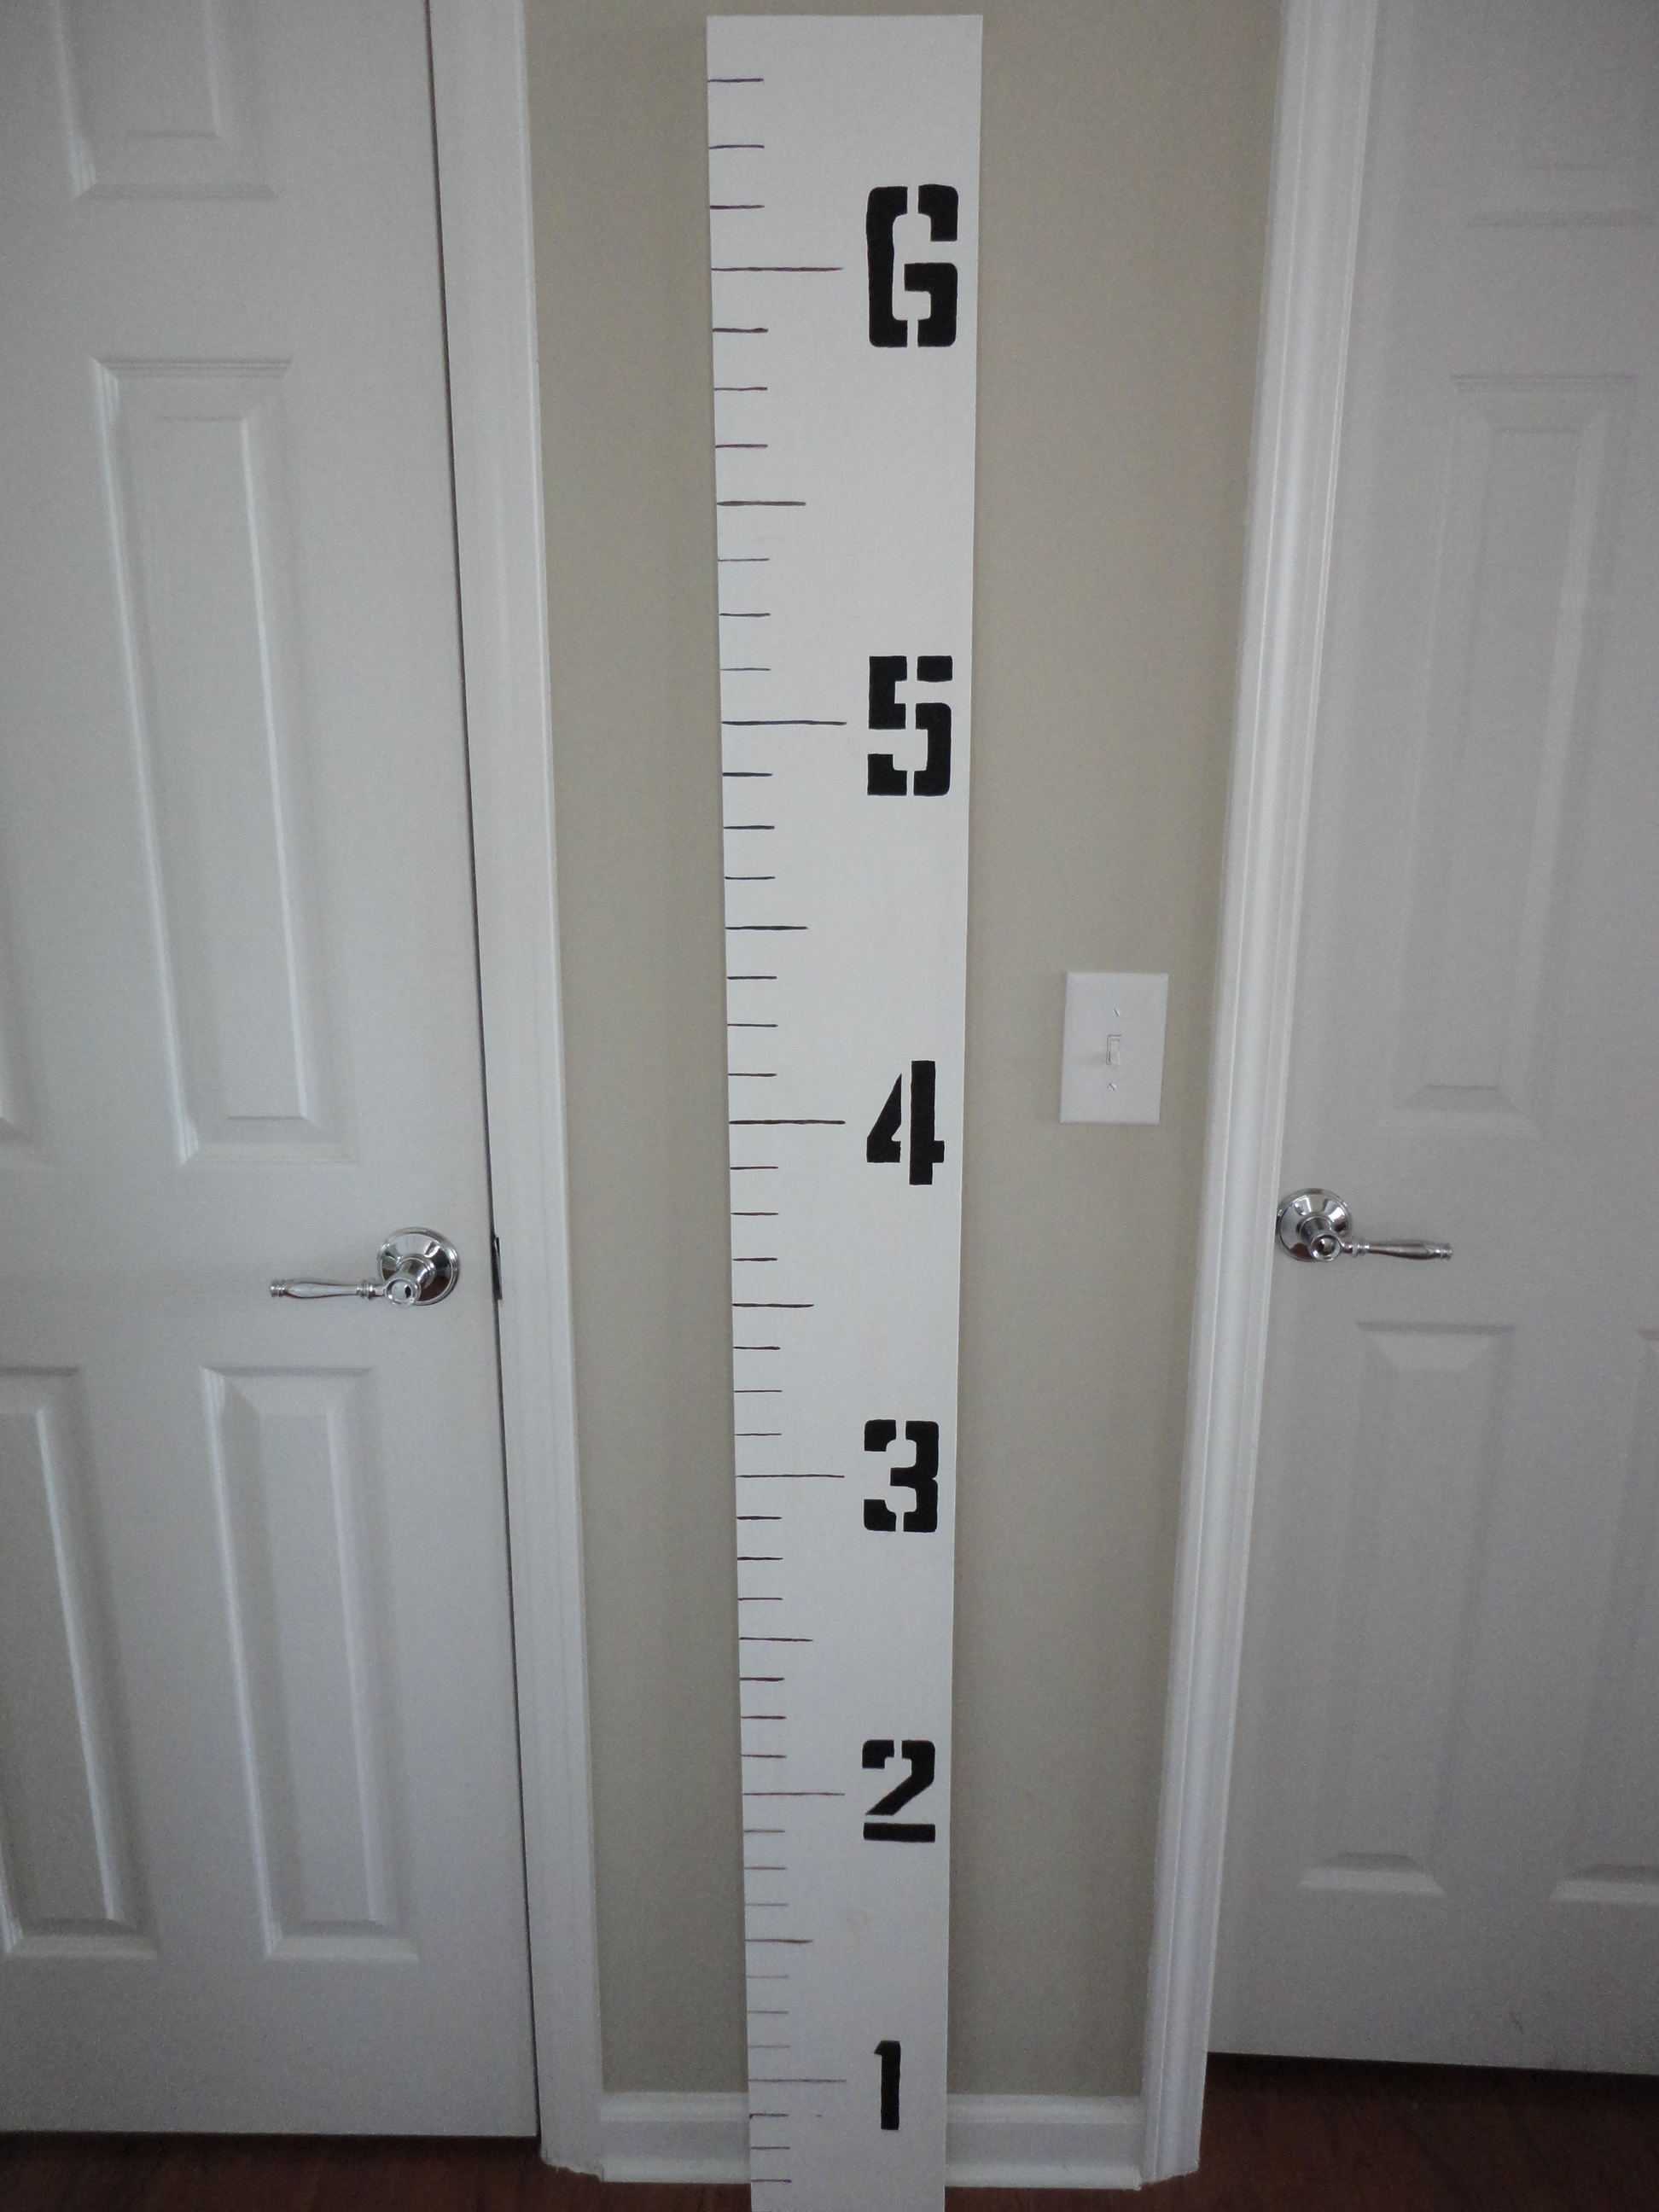 Wall Height Measurement Chart